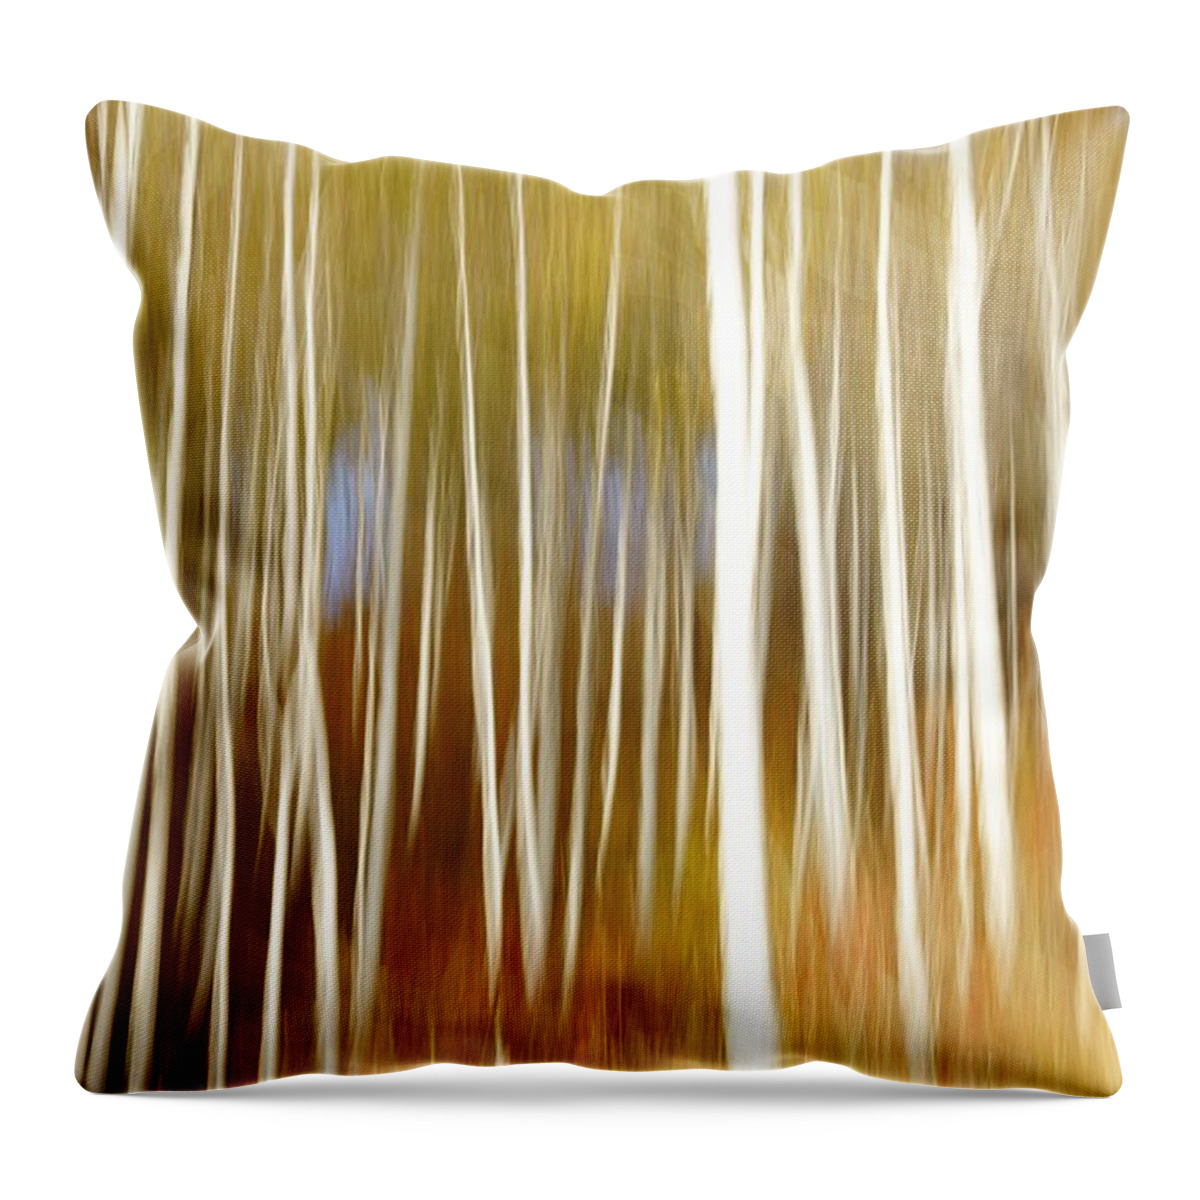 Blurred Motion Throw Pillow featuring the photograph Variation Of Birch by Penboy